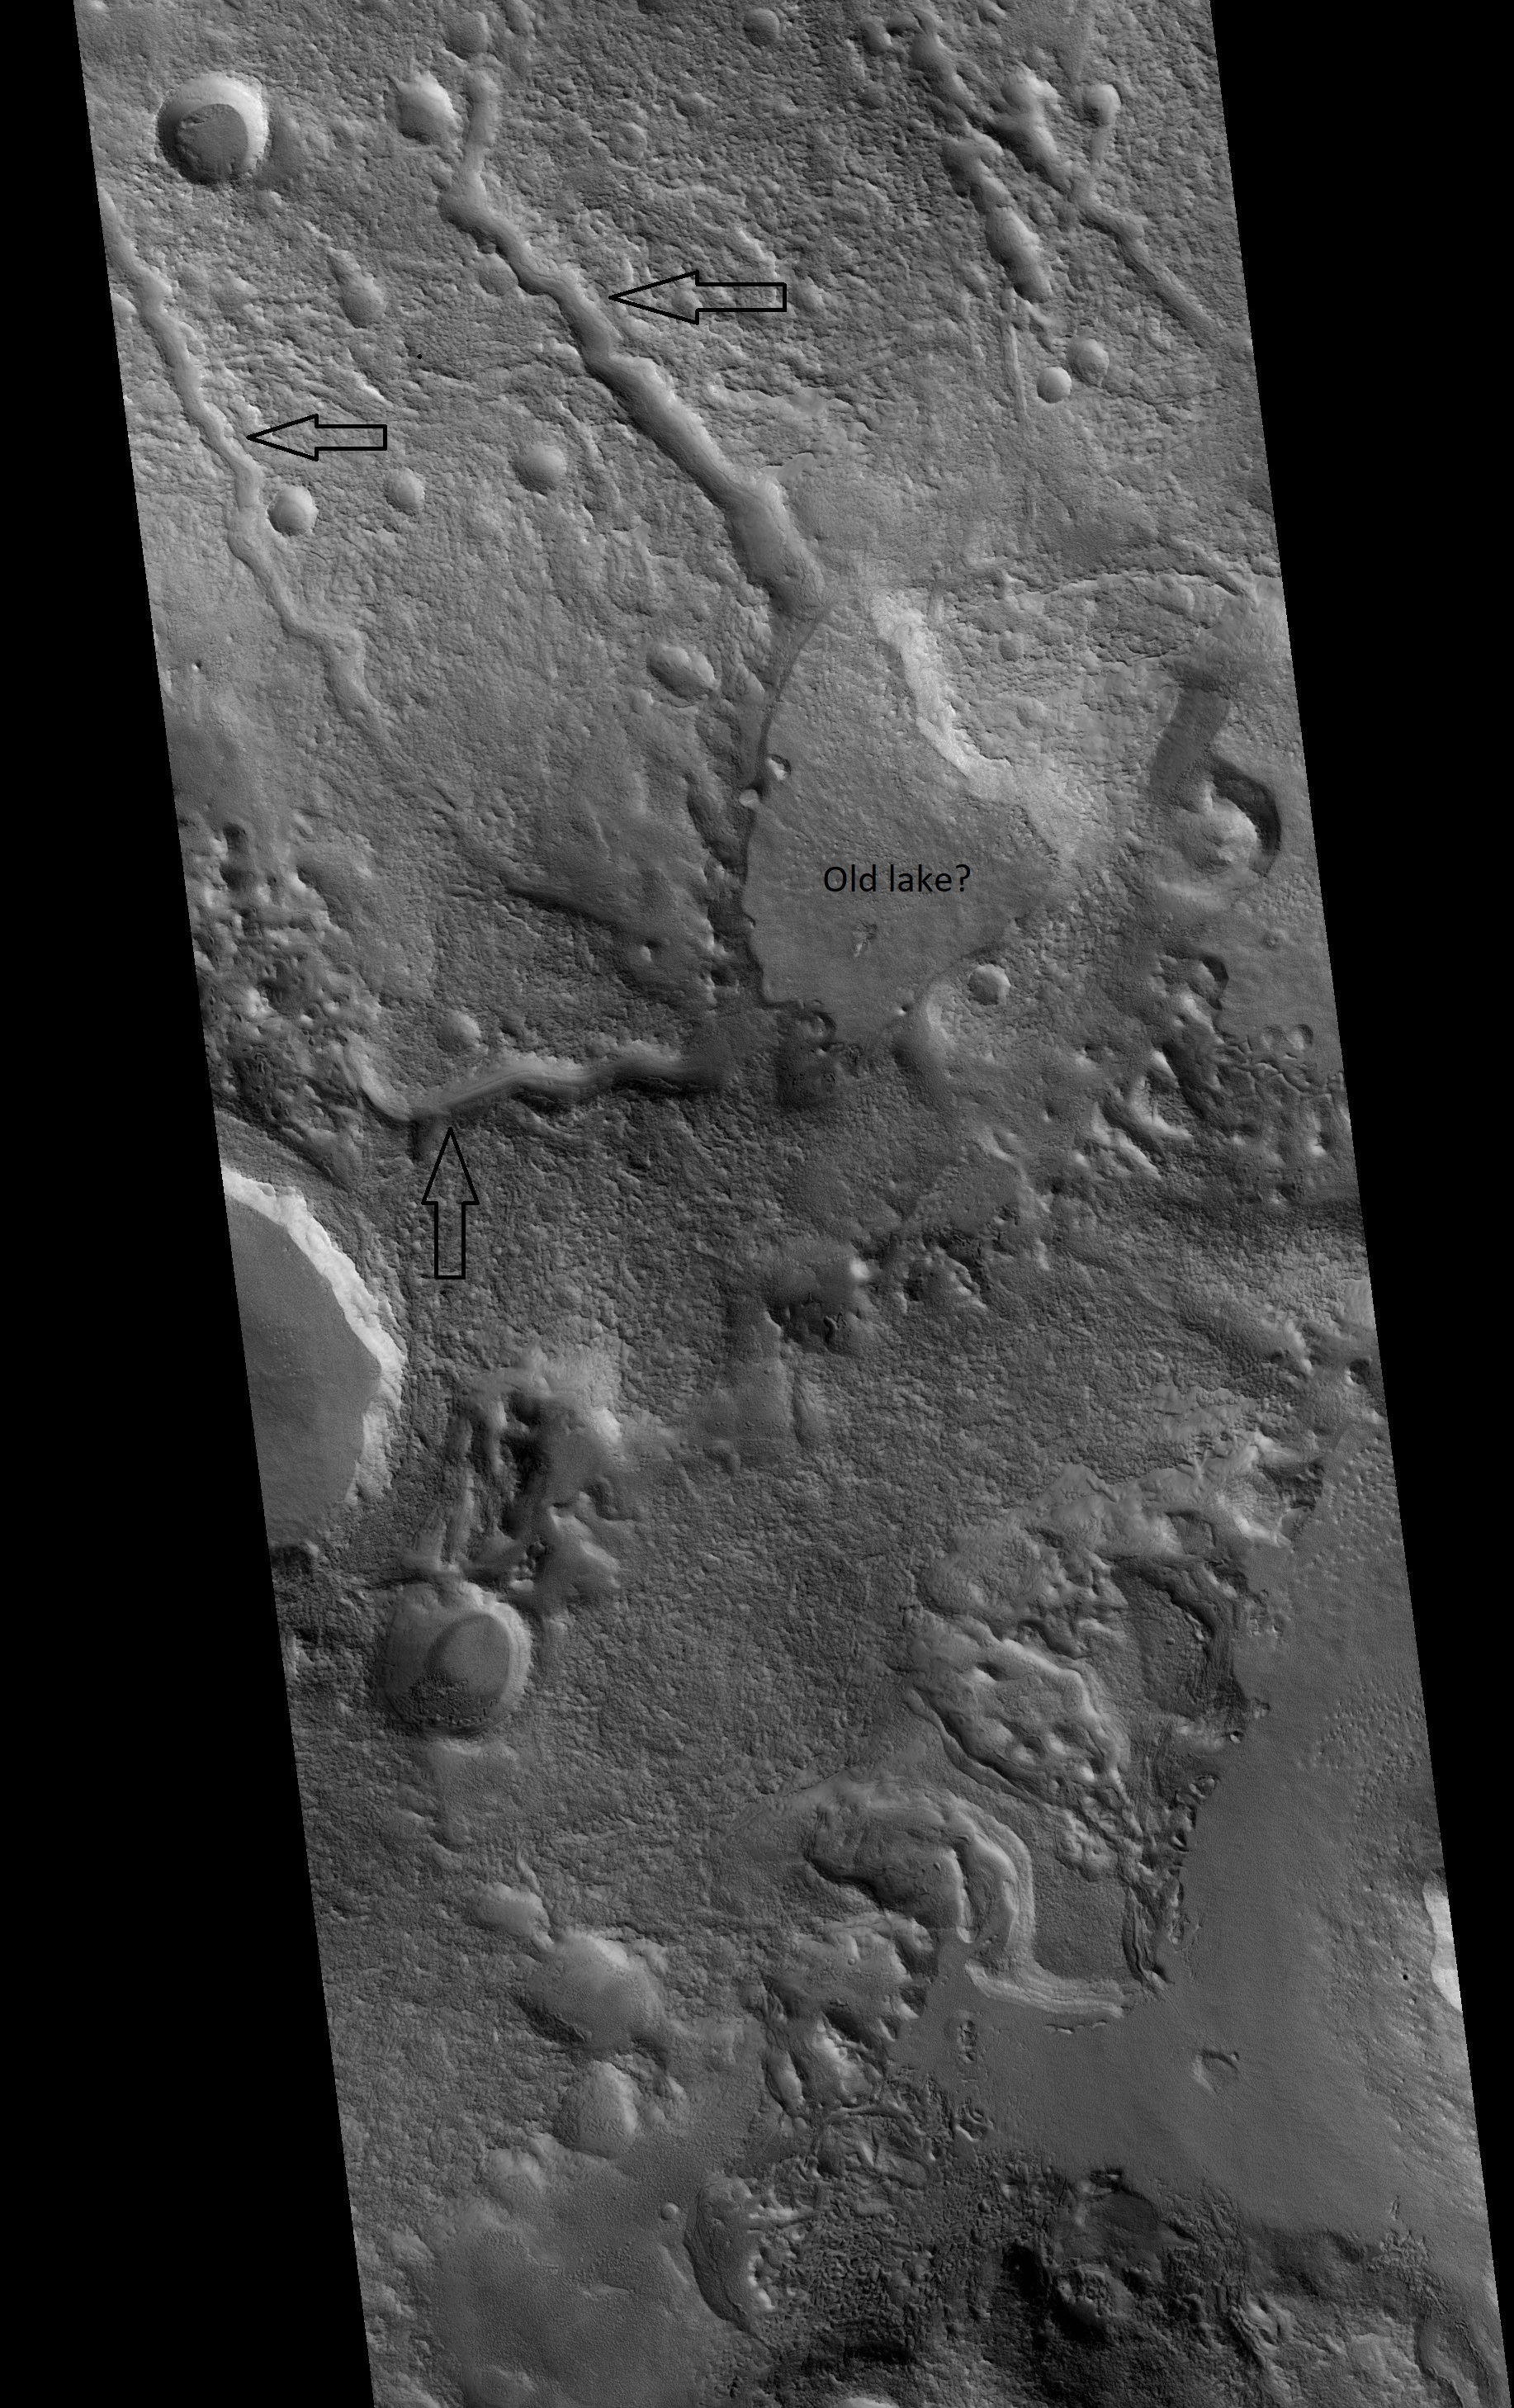 Channels that empty into a low area that could have been a lake, as seen by HiRISE under HiWish program